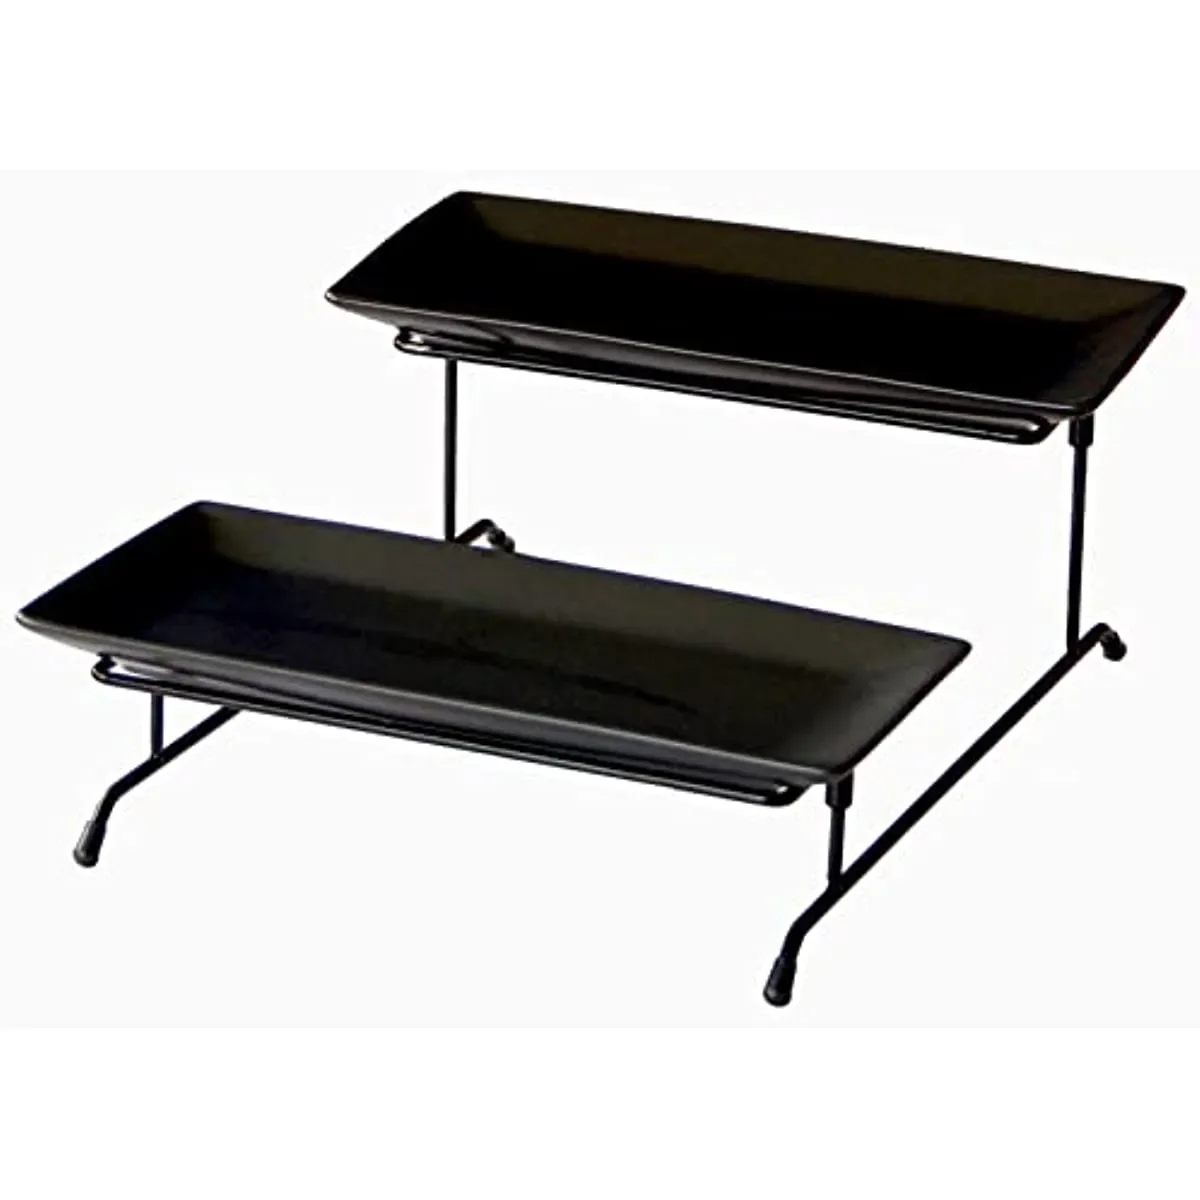 

2 Tier Serving Tray Stand Collapsible Detachable Black Tiered Serving Tray with 2 Porcelain Serving Platters Tier Serving Trays